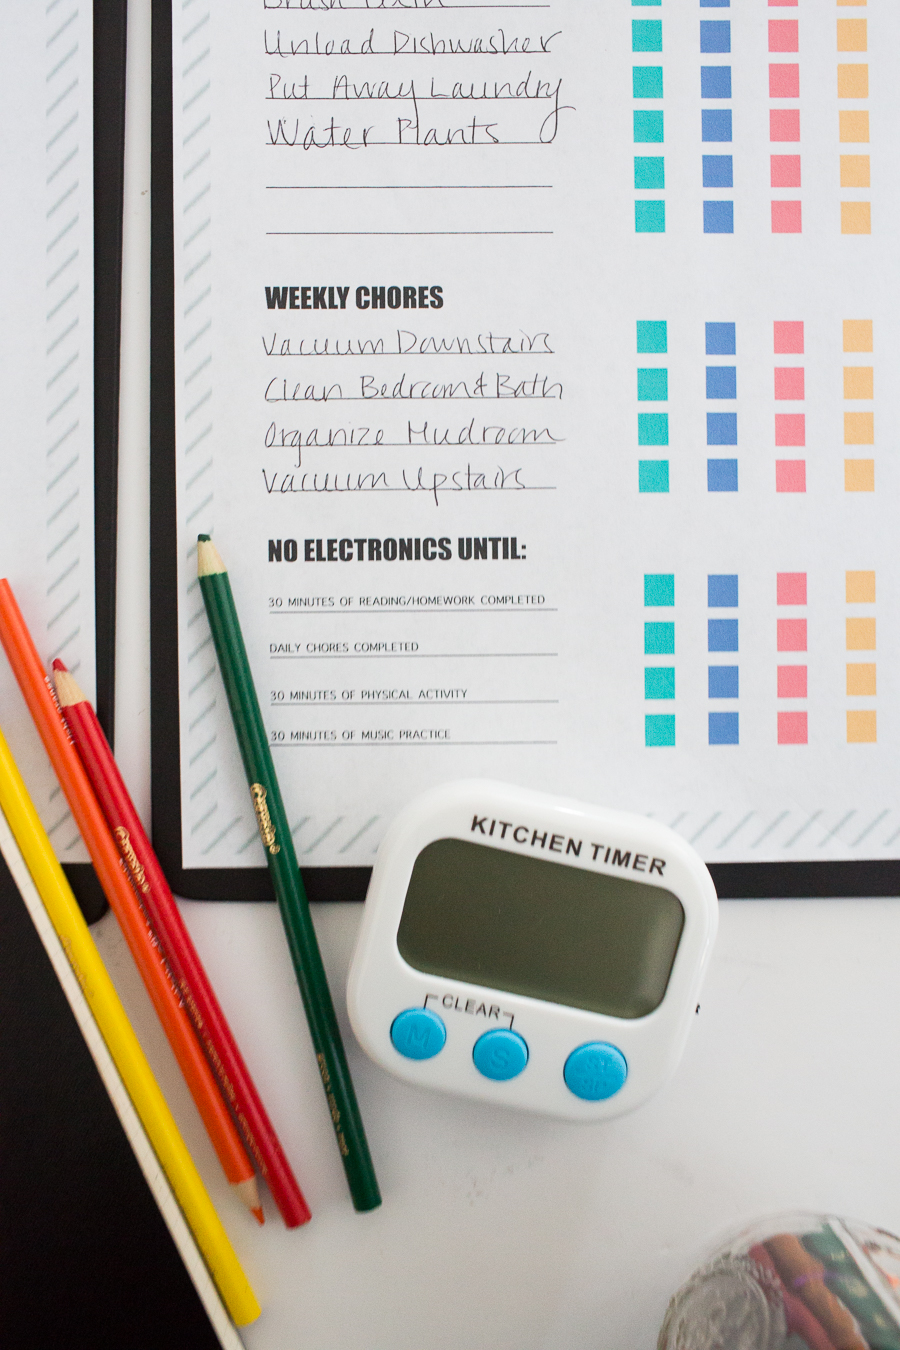 How to Limit Screen Time for Kids and Free Printable Chore Charts free kids chore charts free printables kids chore charts limiting kids on social media timers to limit kids electronic time limiting electronics parenting teens the effects of social media